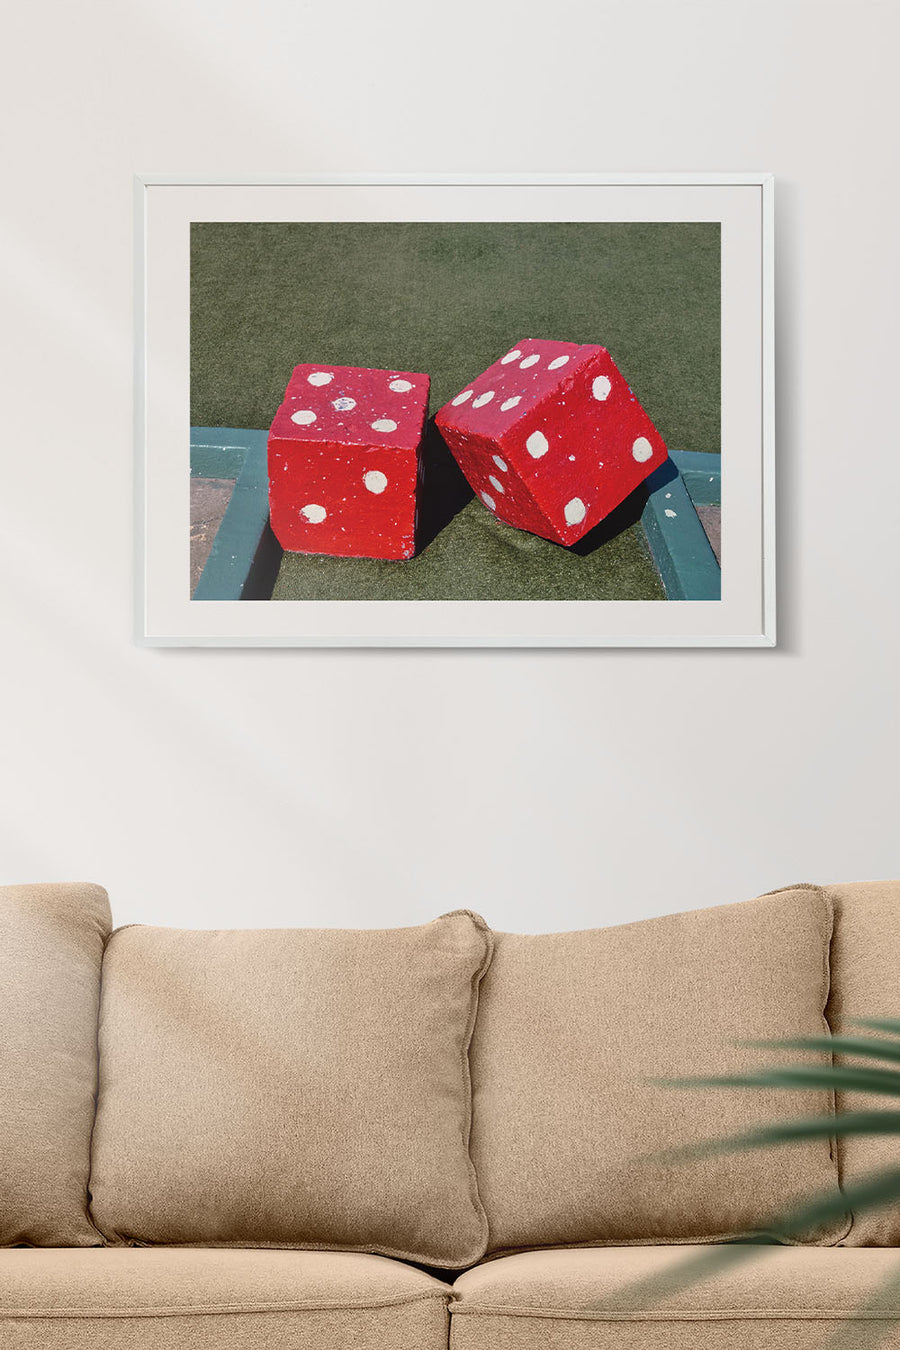 Roadside attraction art print featuring dice.